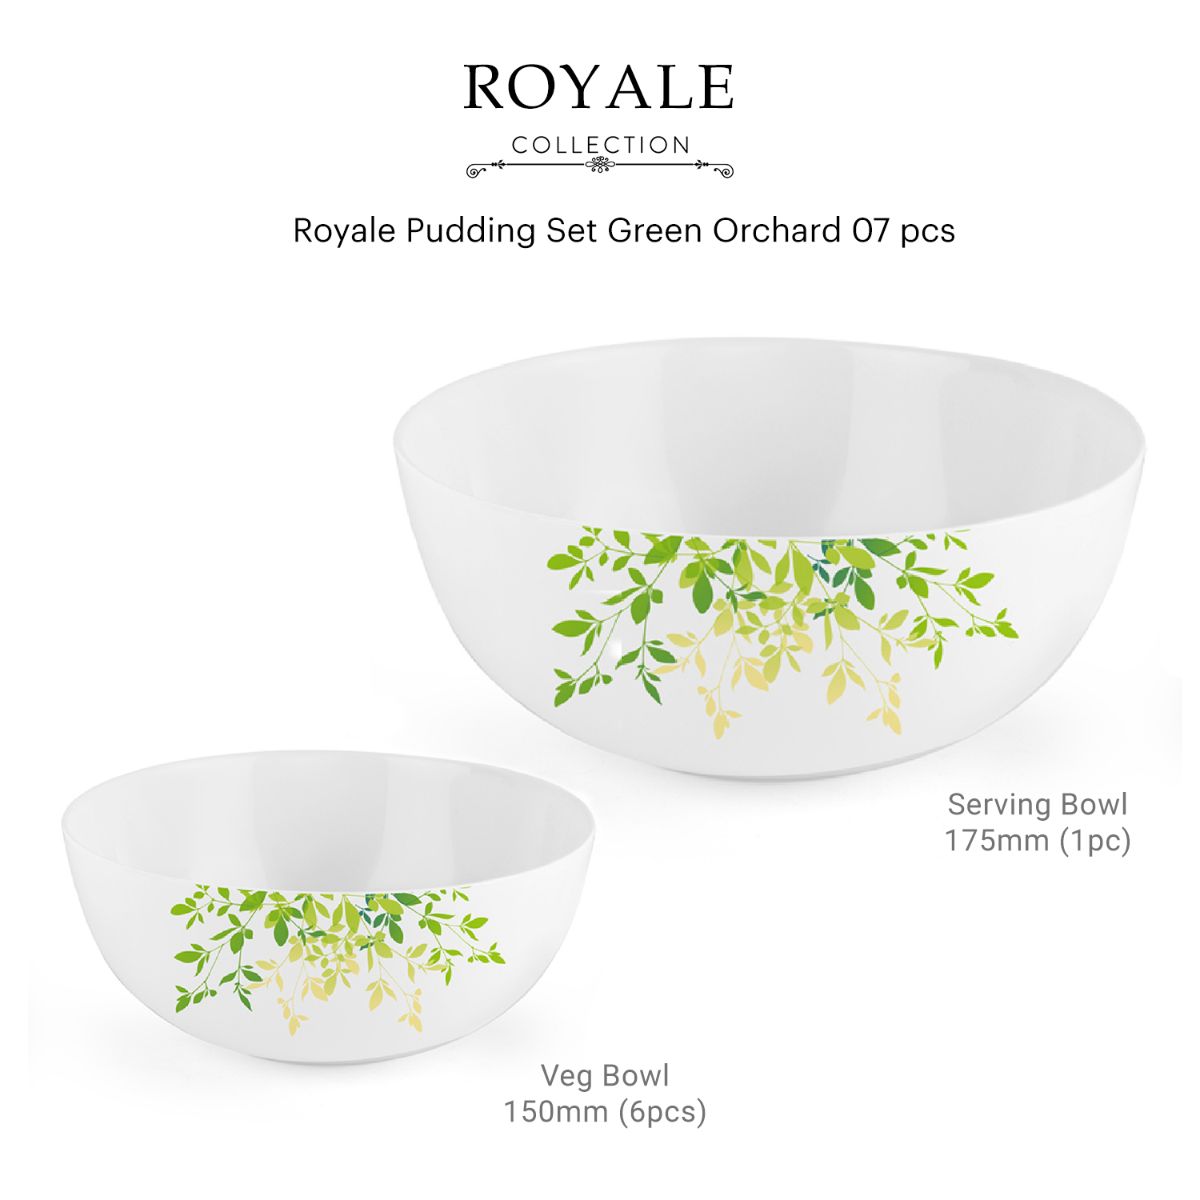 Royale Series Pudding Gift Set, 7 Pieces Green Orchard / 7 Pieces